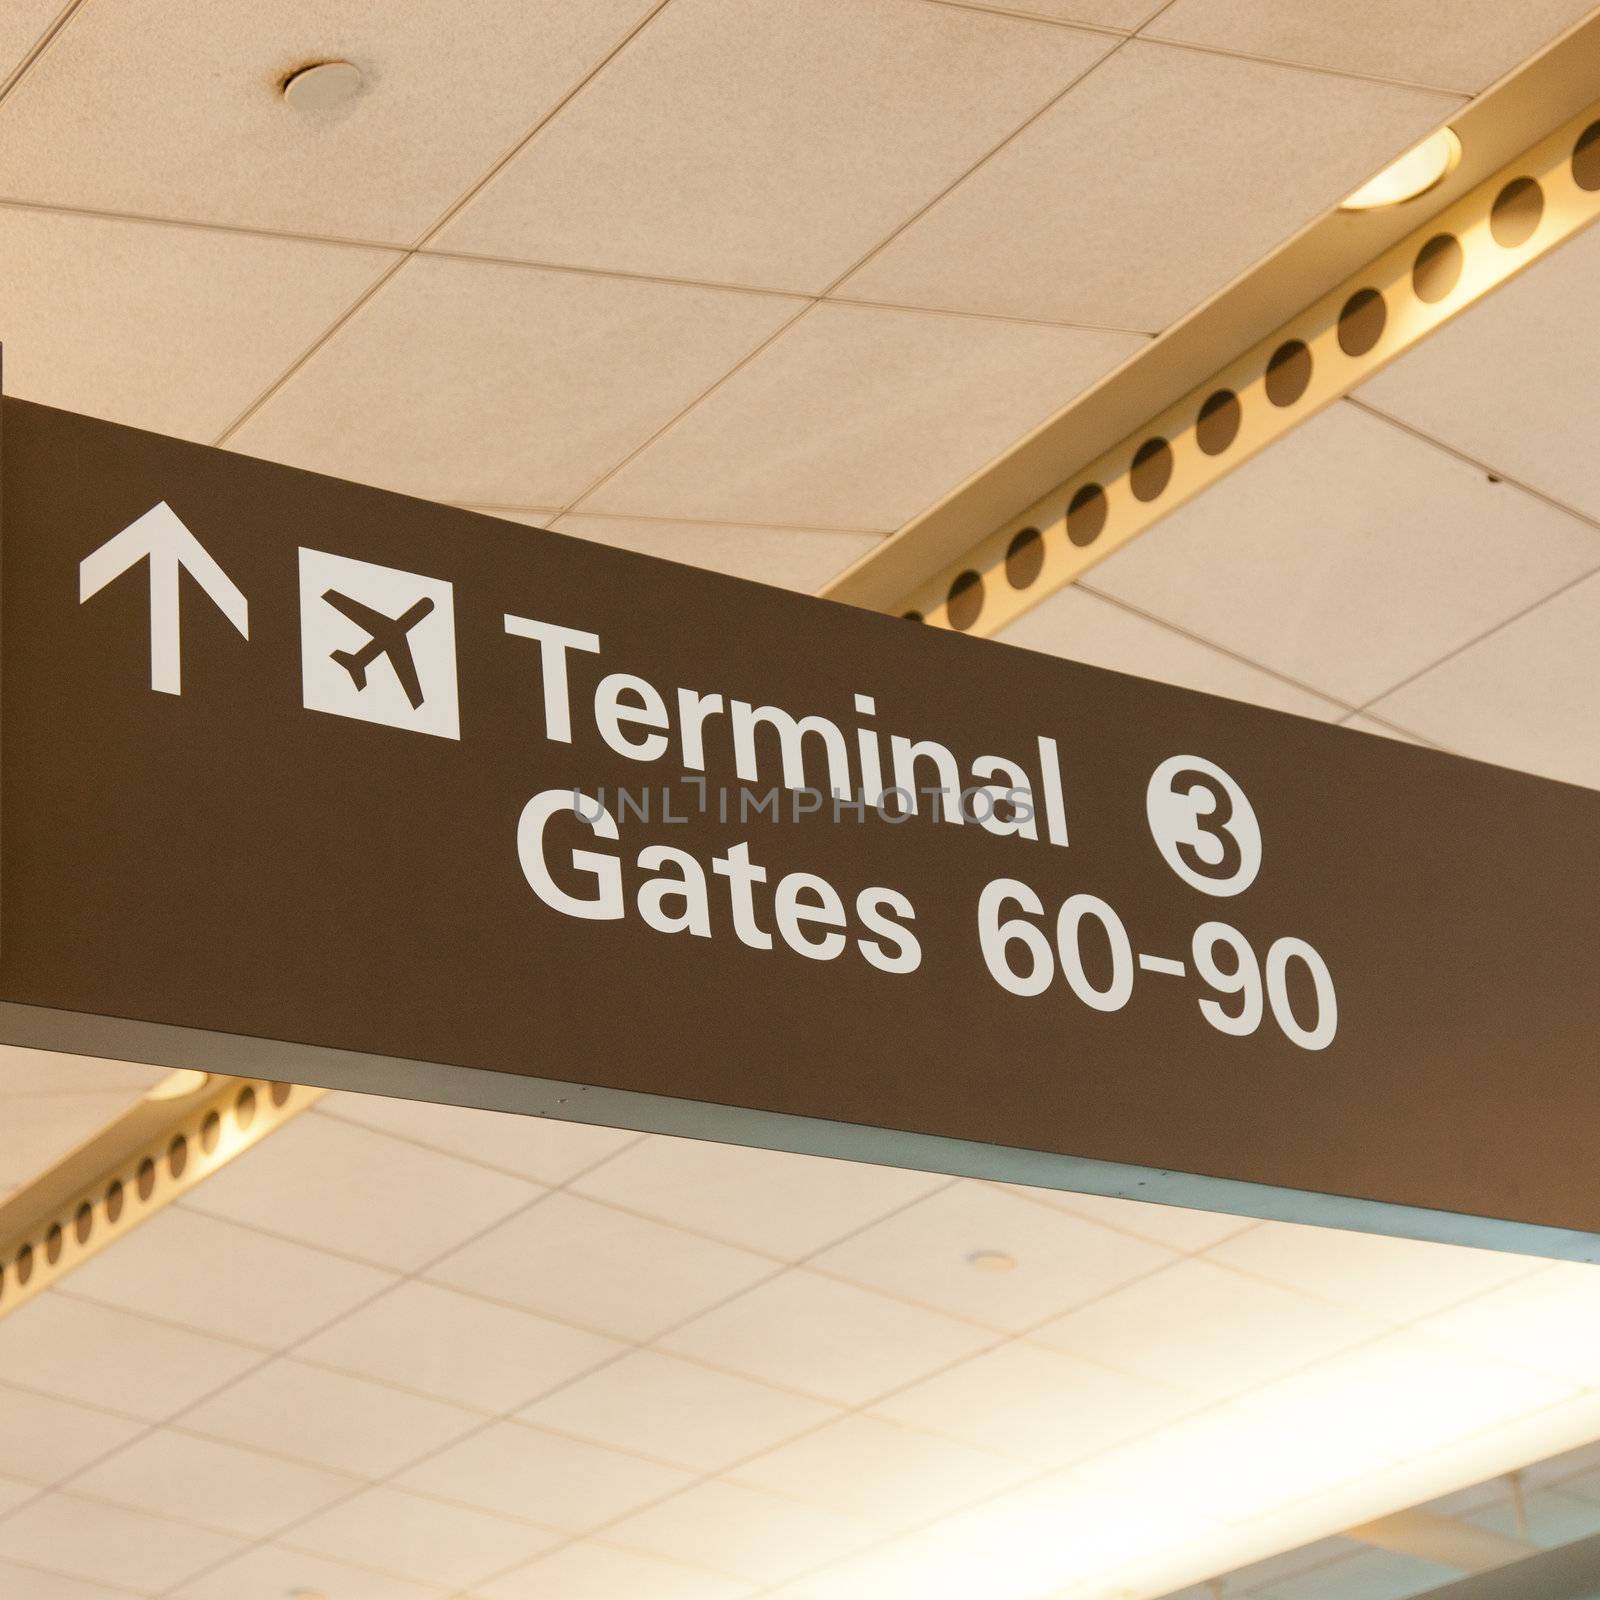 Informational sign showing gate numbers at international airport.